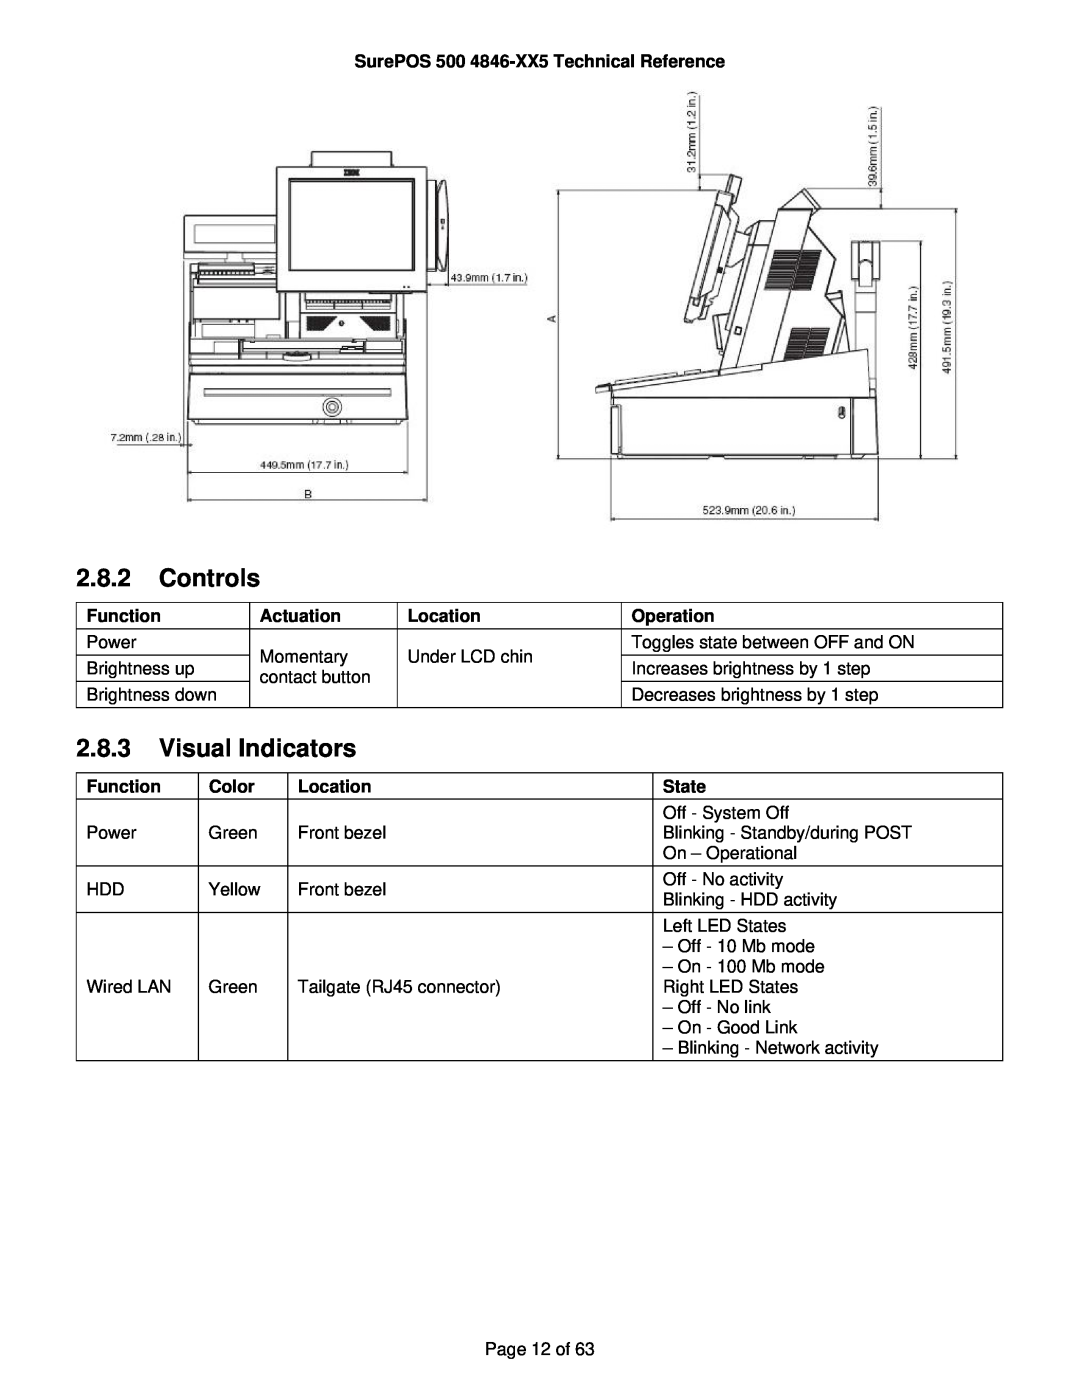 IBM Controls, Visual Indicators, SurePOS 500 4846-XX5 Technical Reference, Function, Actuation, Location, Operation 